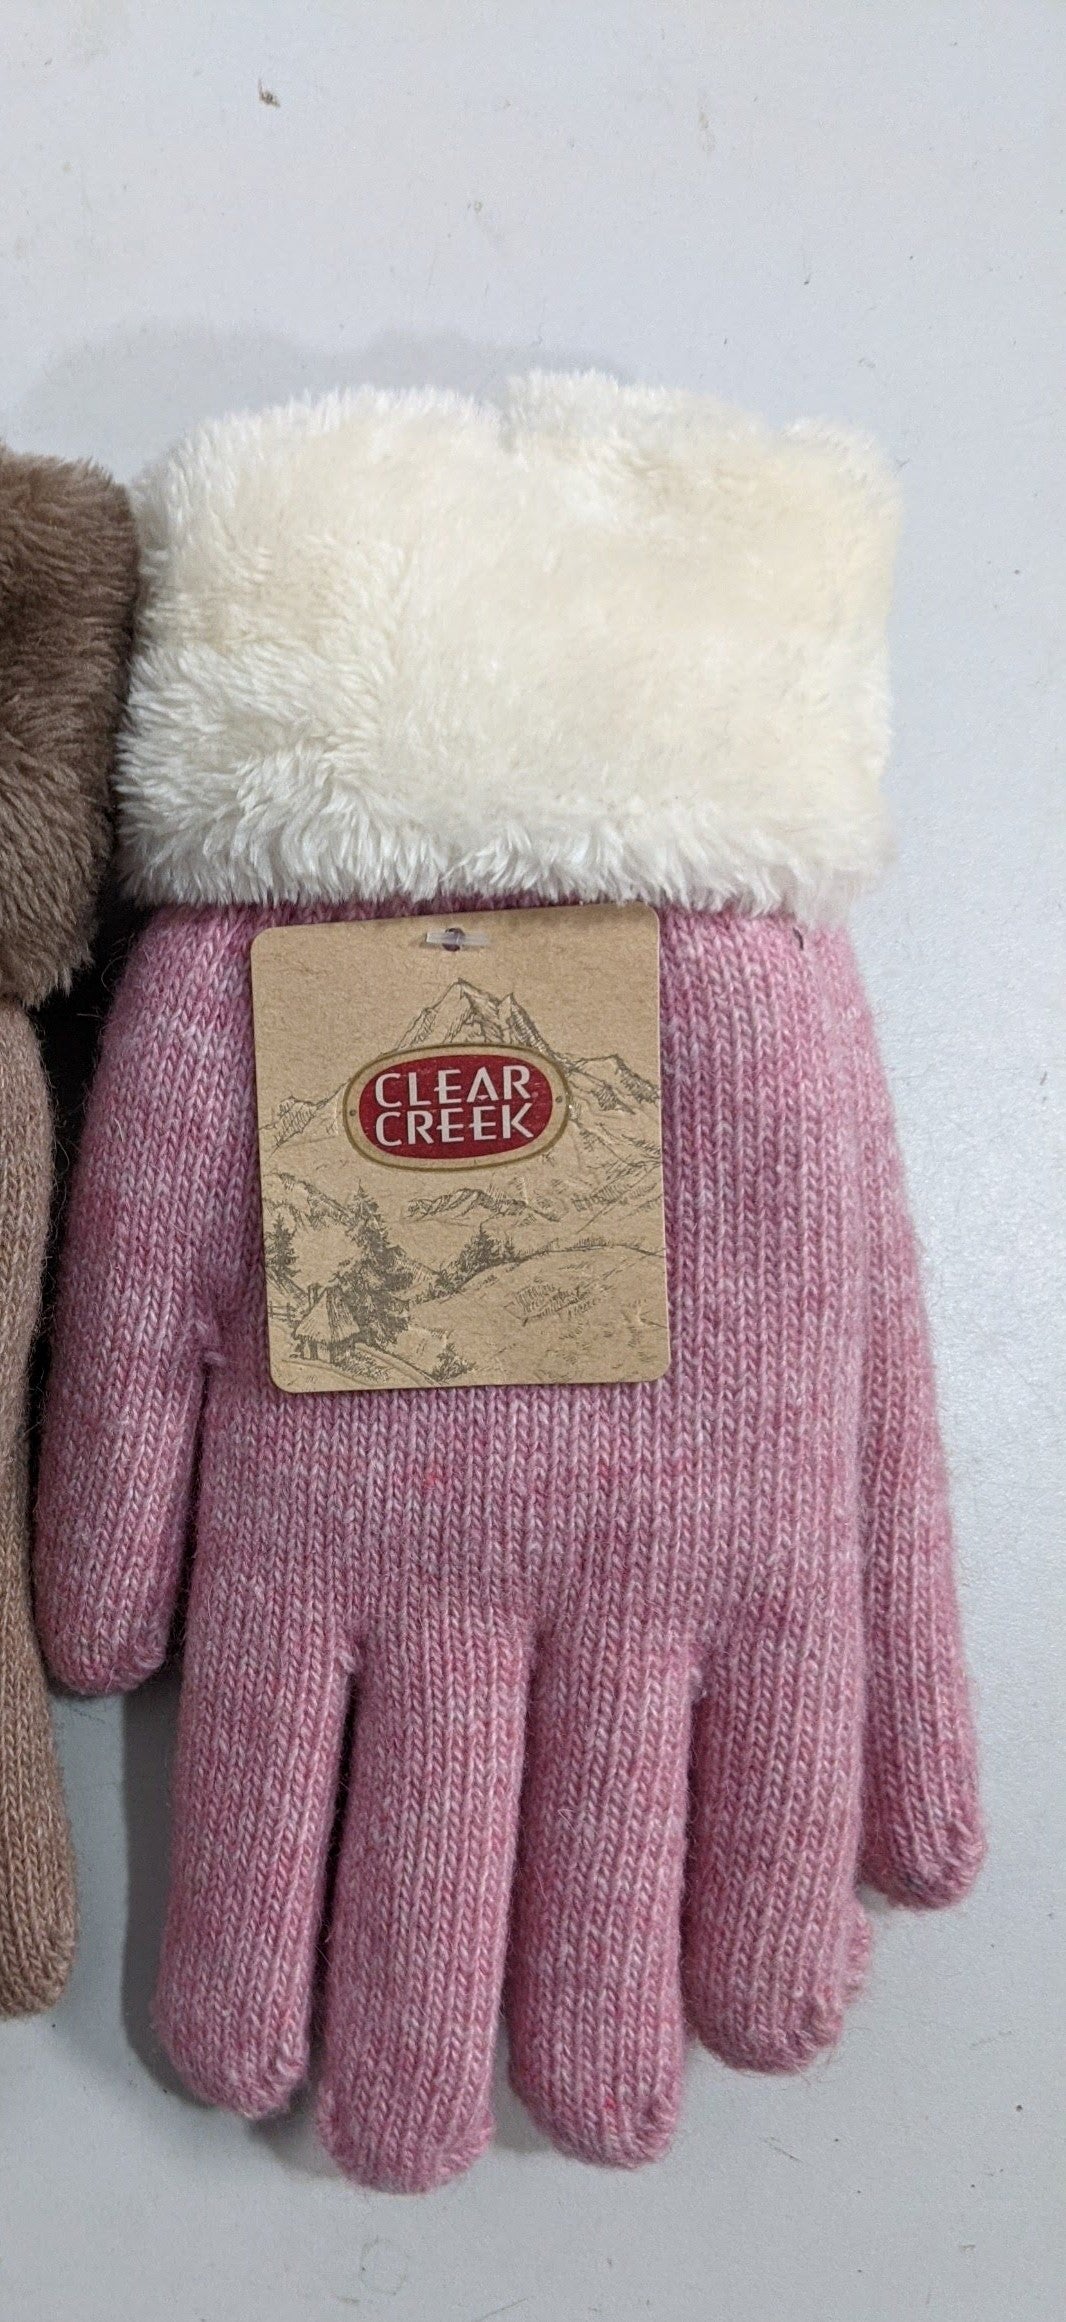 Clear Creek Winter Gloves OSFM One Size Fits Most Women New Pink